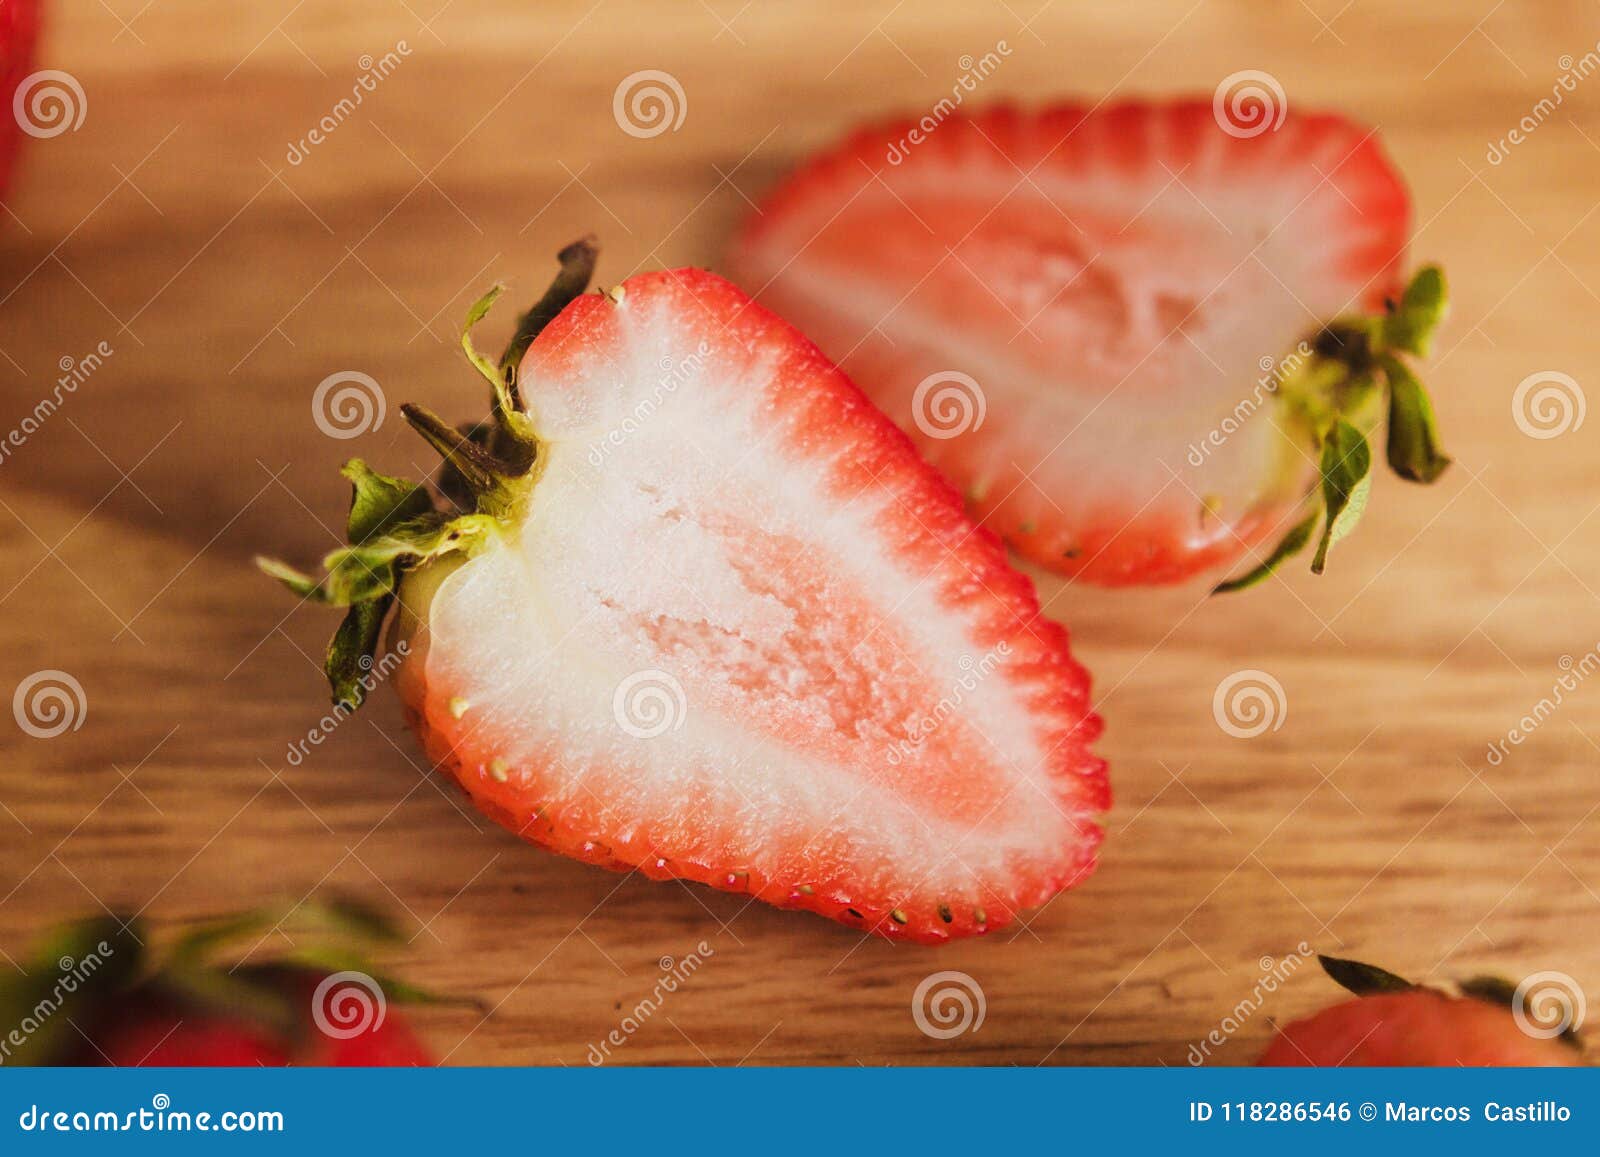 strawberries in a wood background